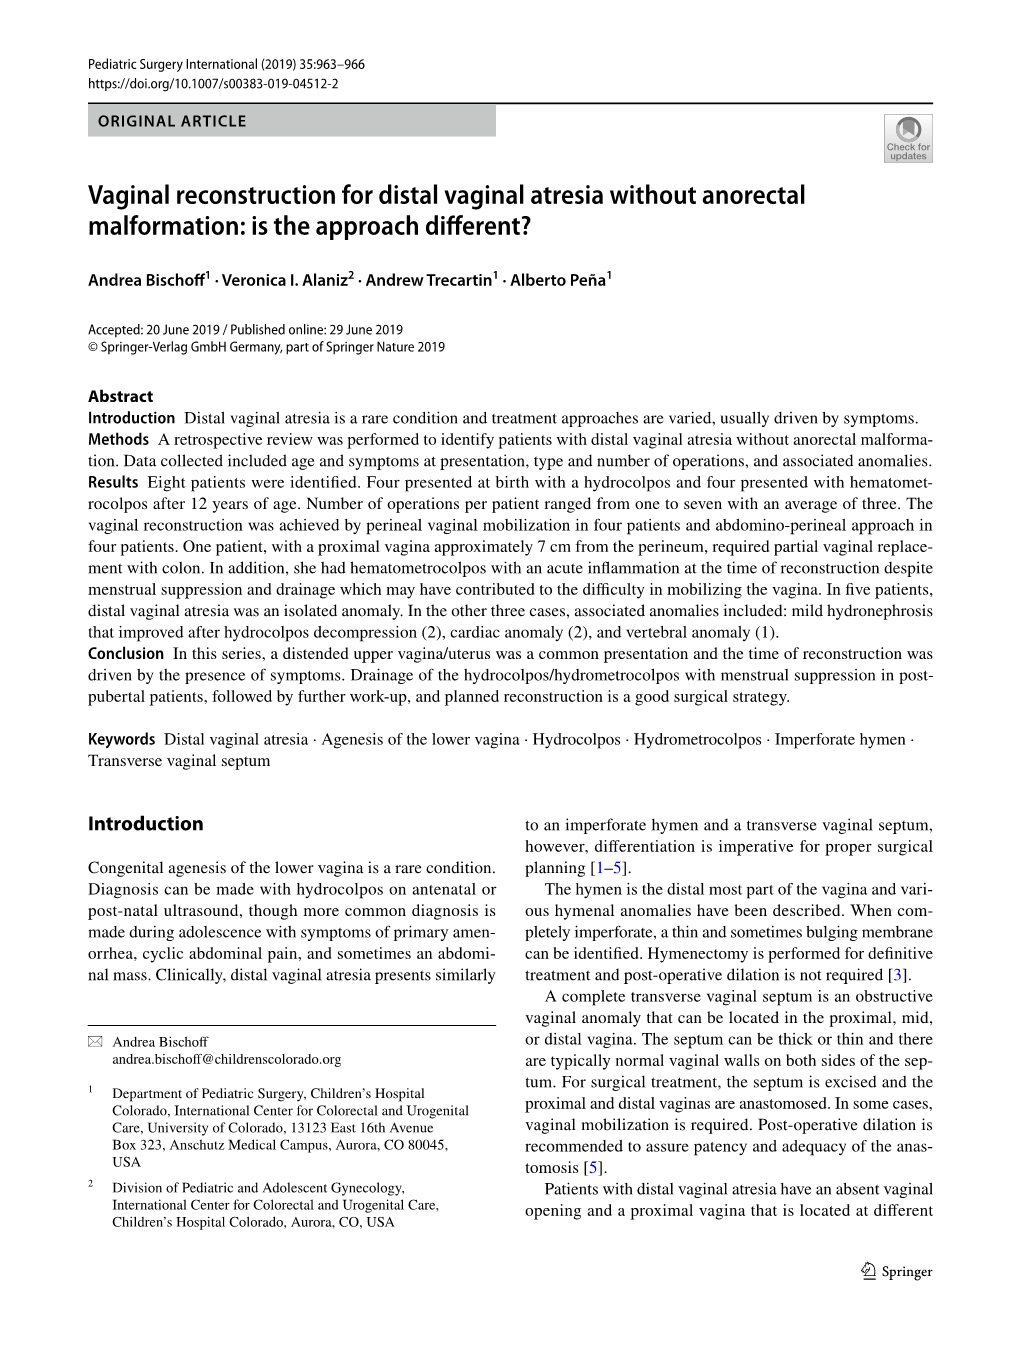 Vaginal Reconstruction for Distal Vaginal Atresia Without Anorectal Malformation: Is the Approach Diferent?